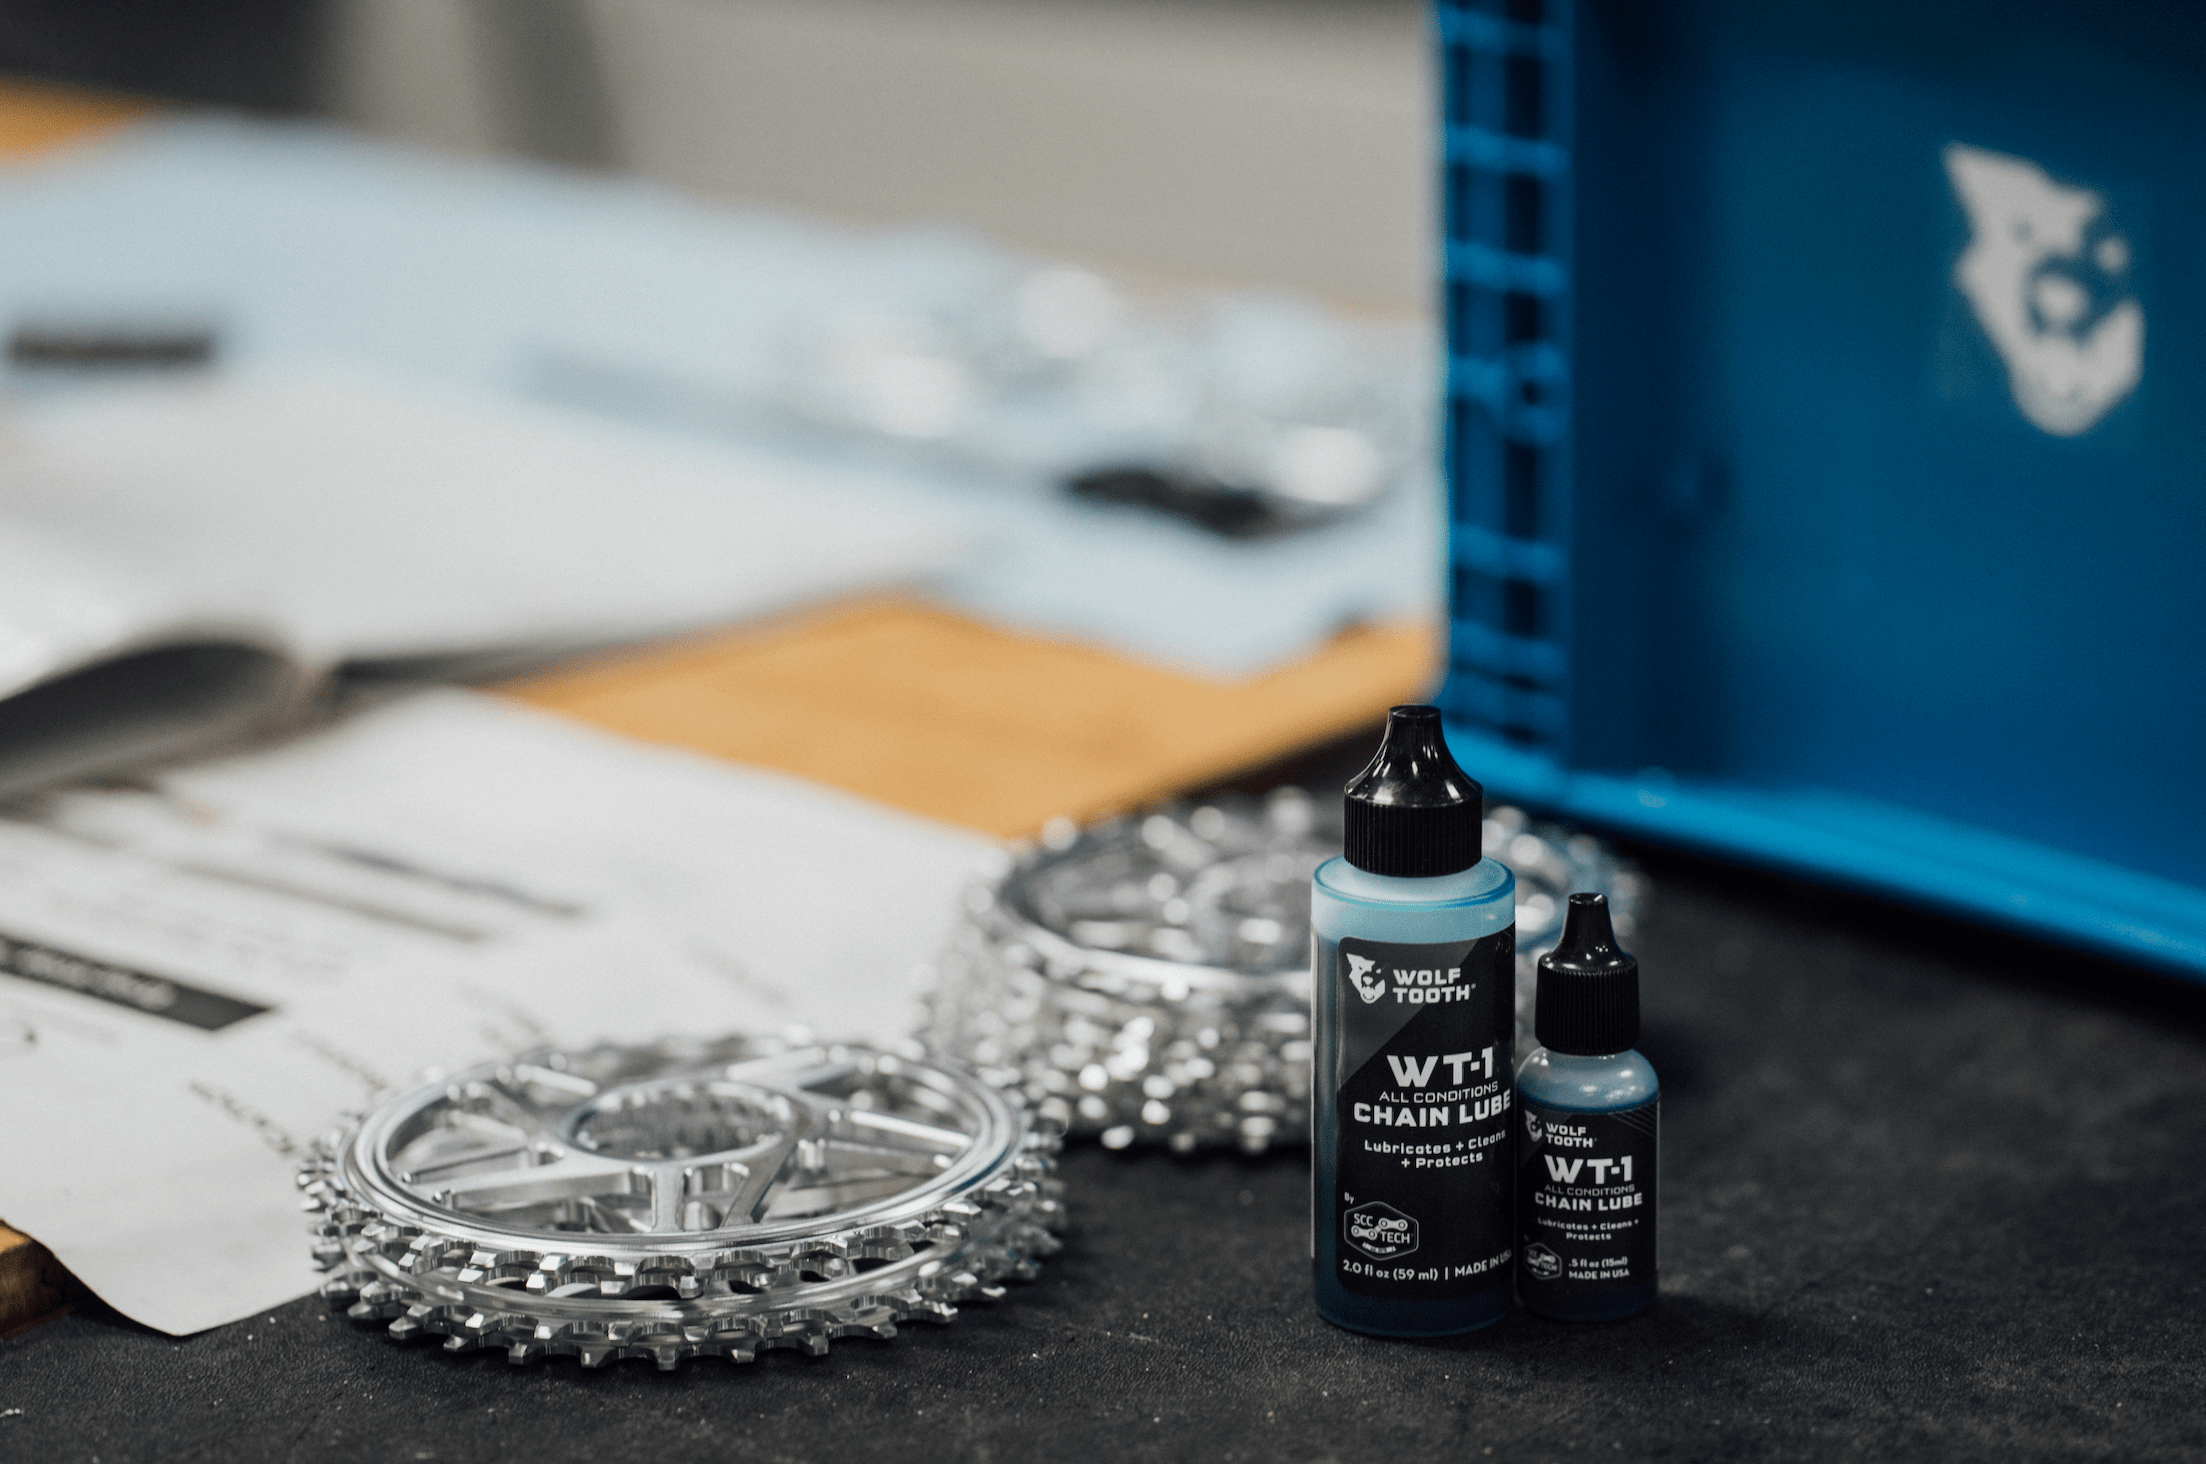 Bike Chain Lube and Grease – Wolf Tooth